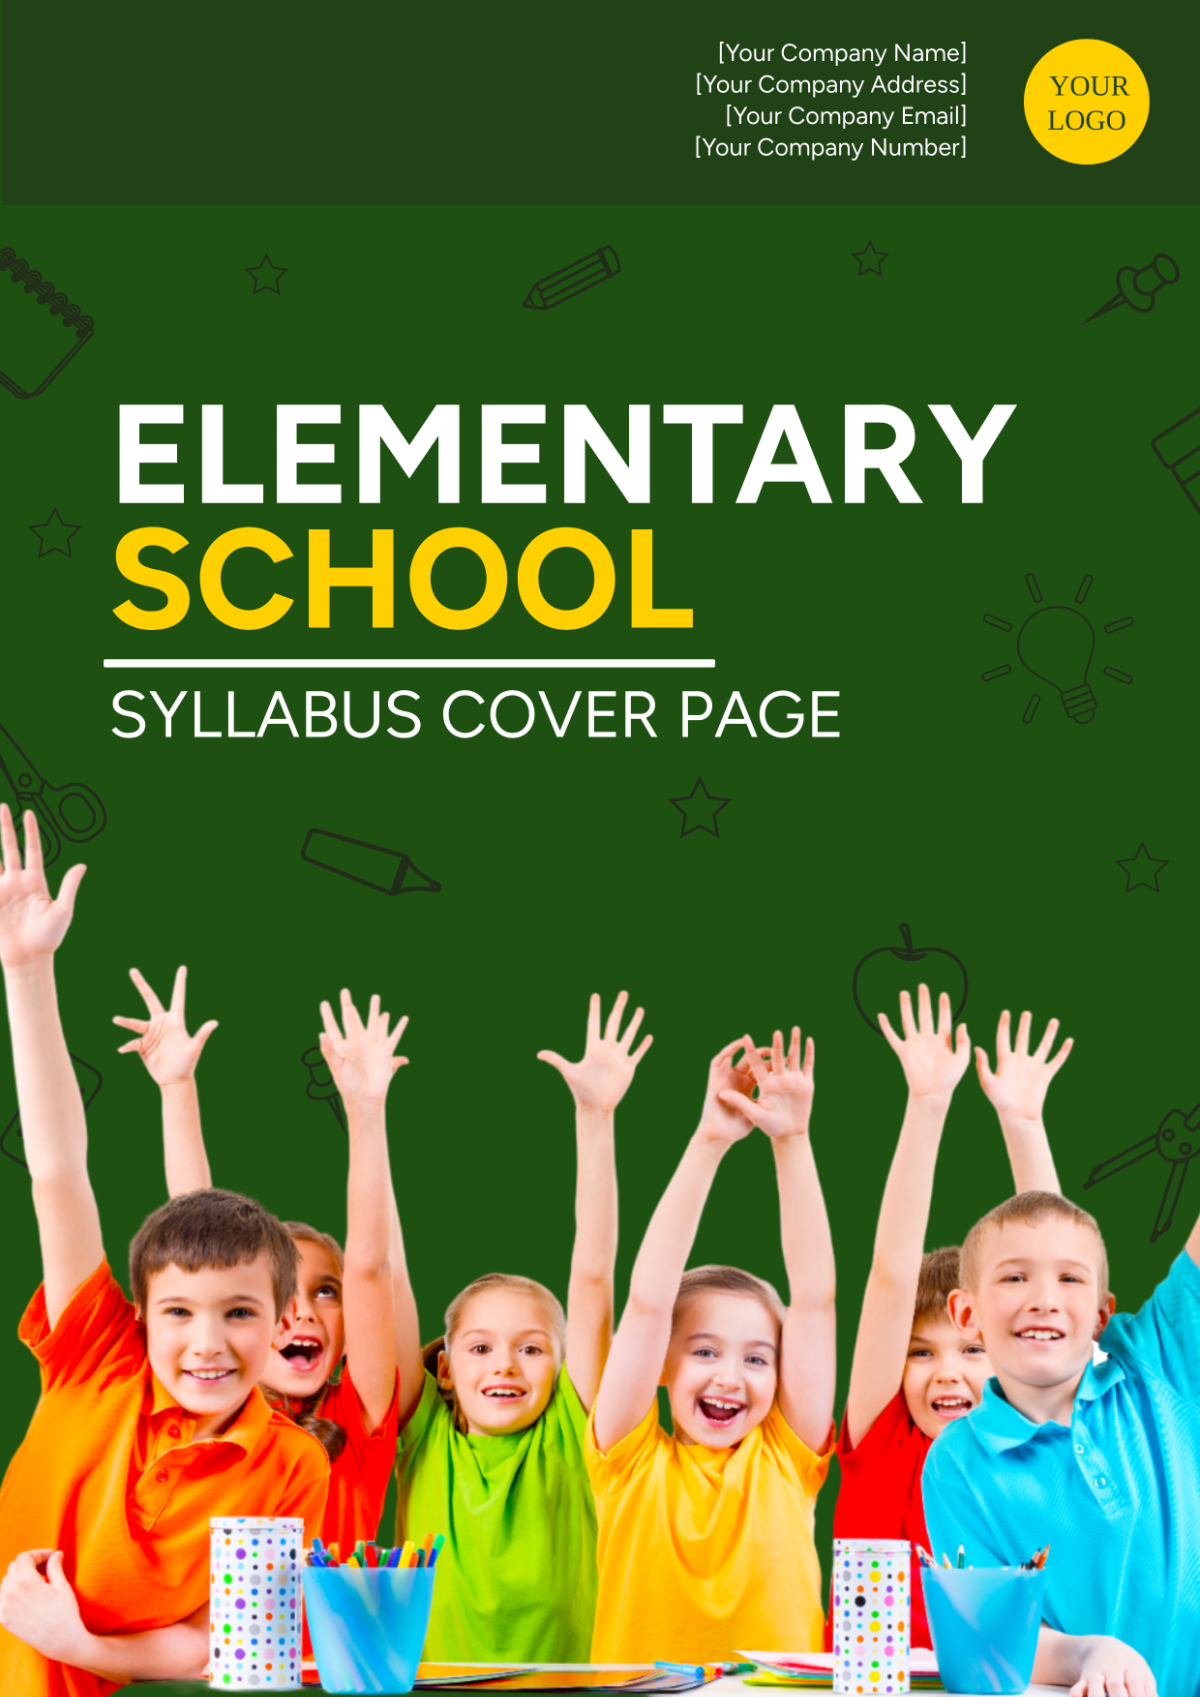 Elementary School Syllabus Cover Page